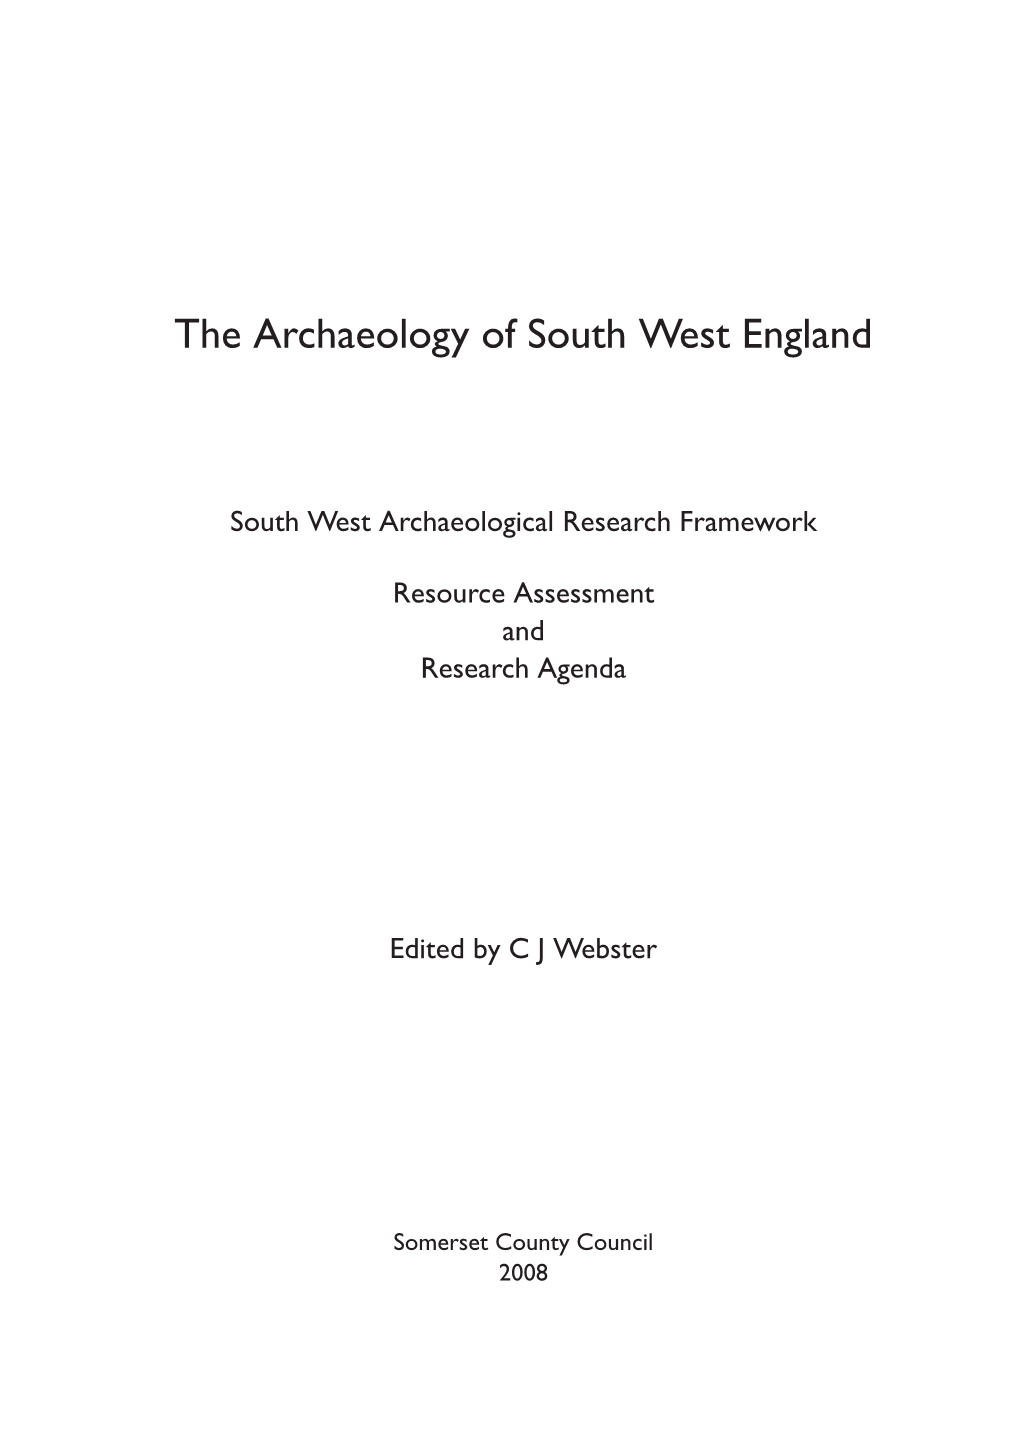 The Archaeology of South West England